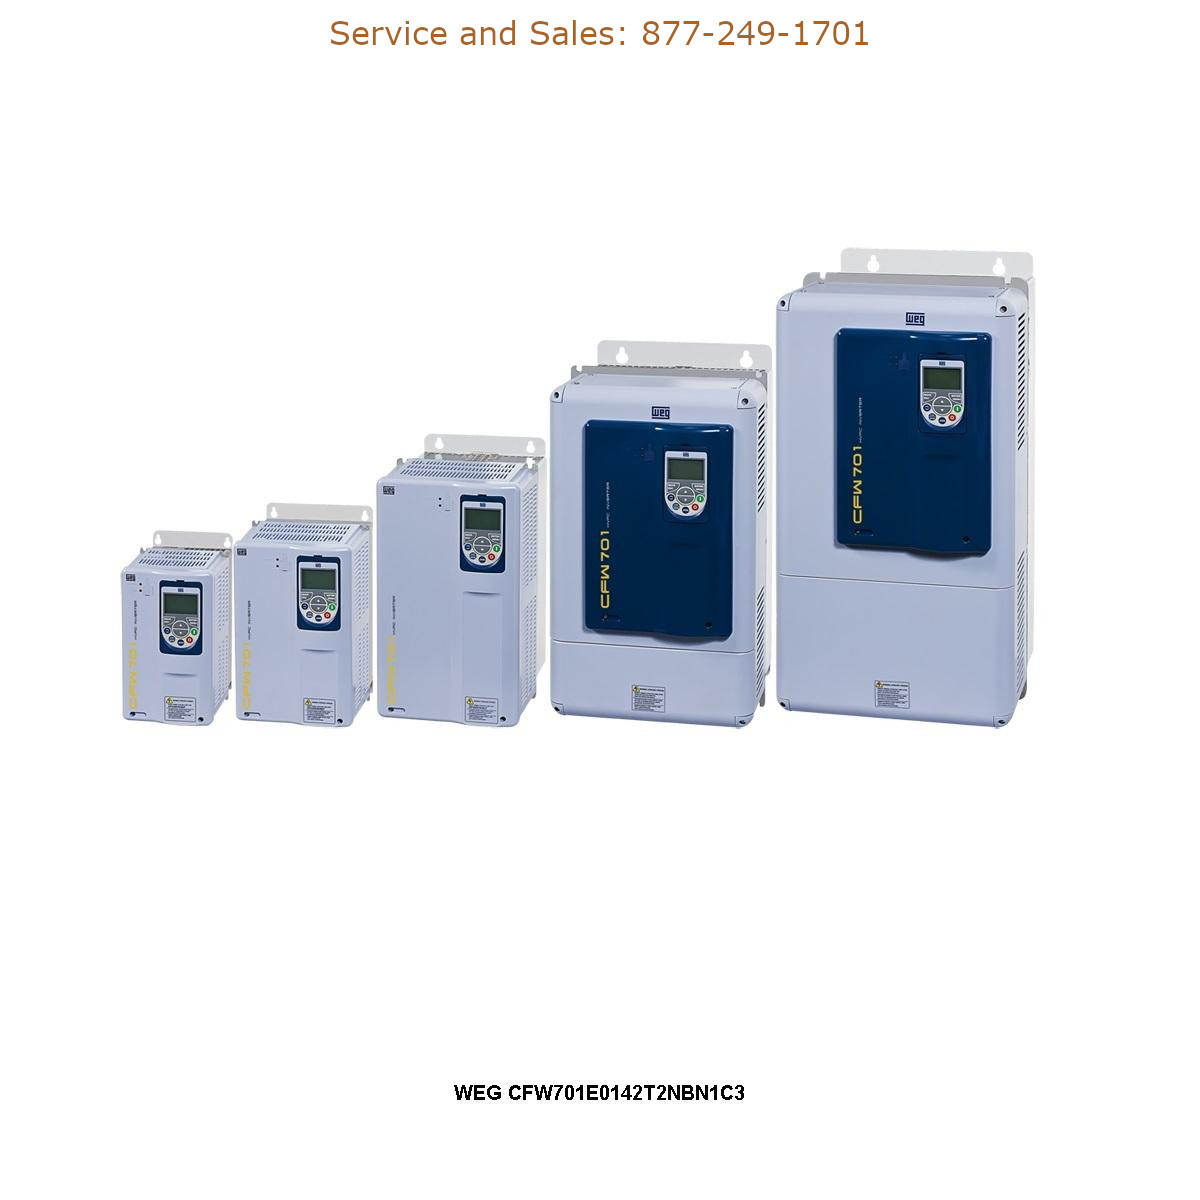 WEG CFW701E0142T2NBN1C3 WEG Model Number CFW701E0142T2NBN1C3 WEG Drives, Variable Speed Drives Repair Service, Troubleshooting, Replacement Parts https://gesrepair.com/wp-content/uploads/2022/WEG/WEG_CFW701E0142T2NBN1C3_Drives_Variable_Speed_Drives.jpg